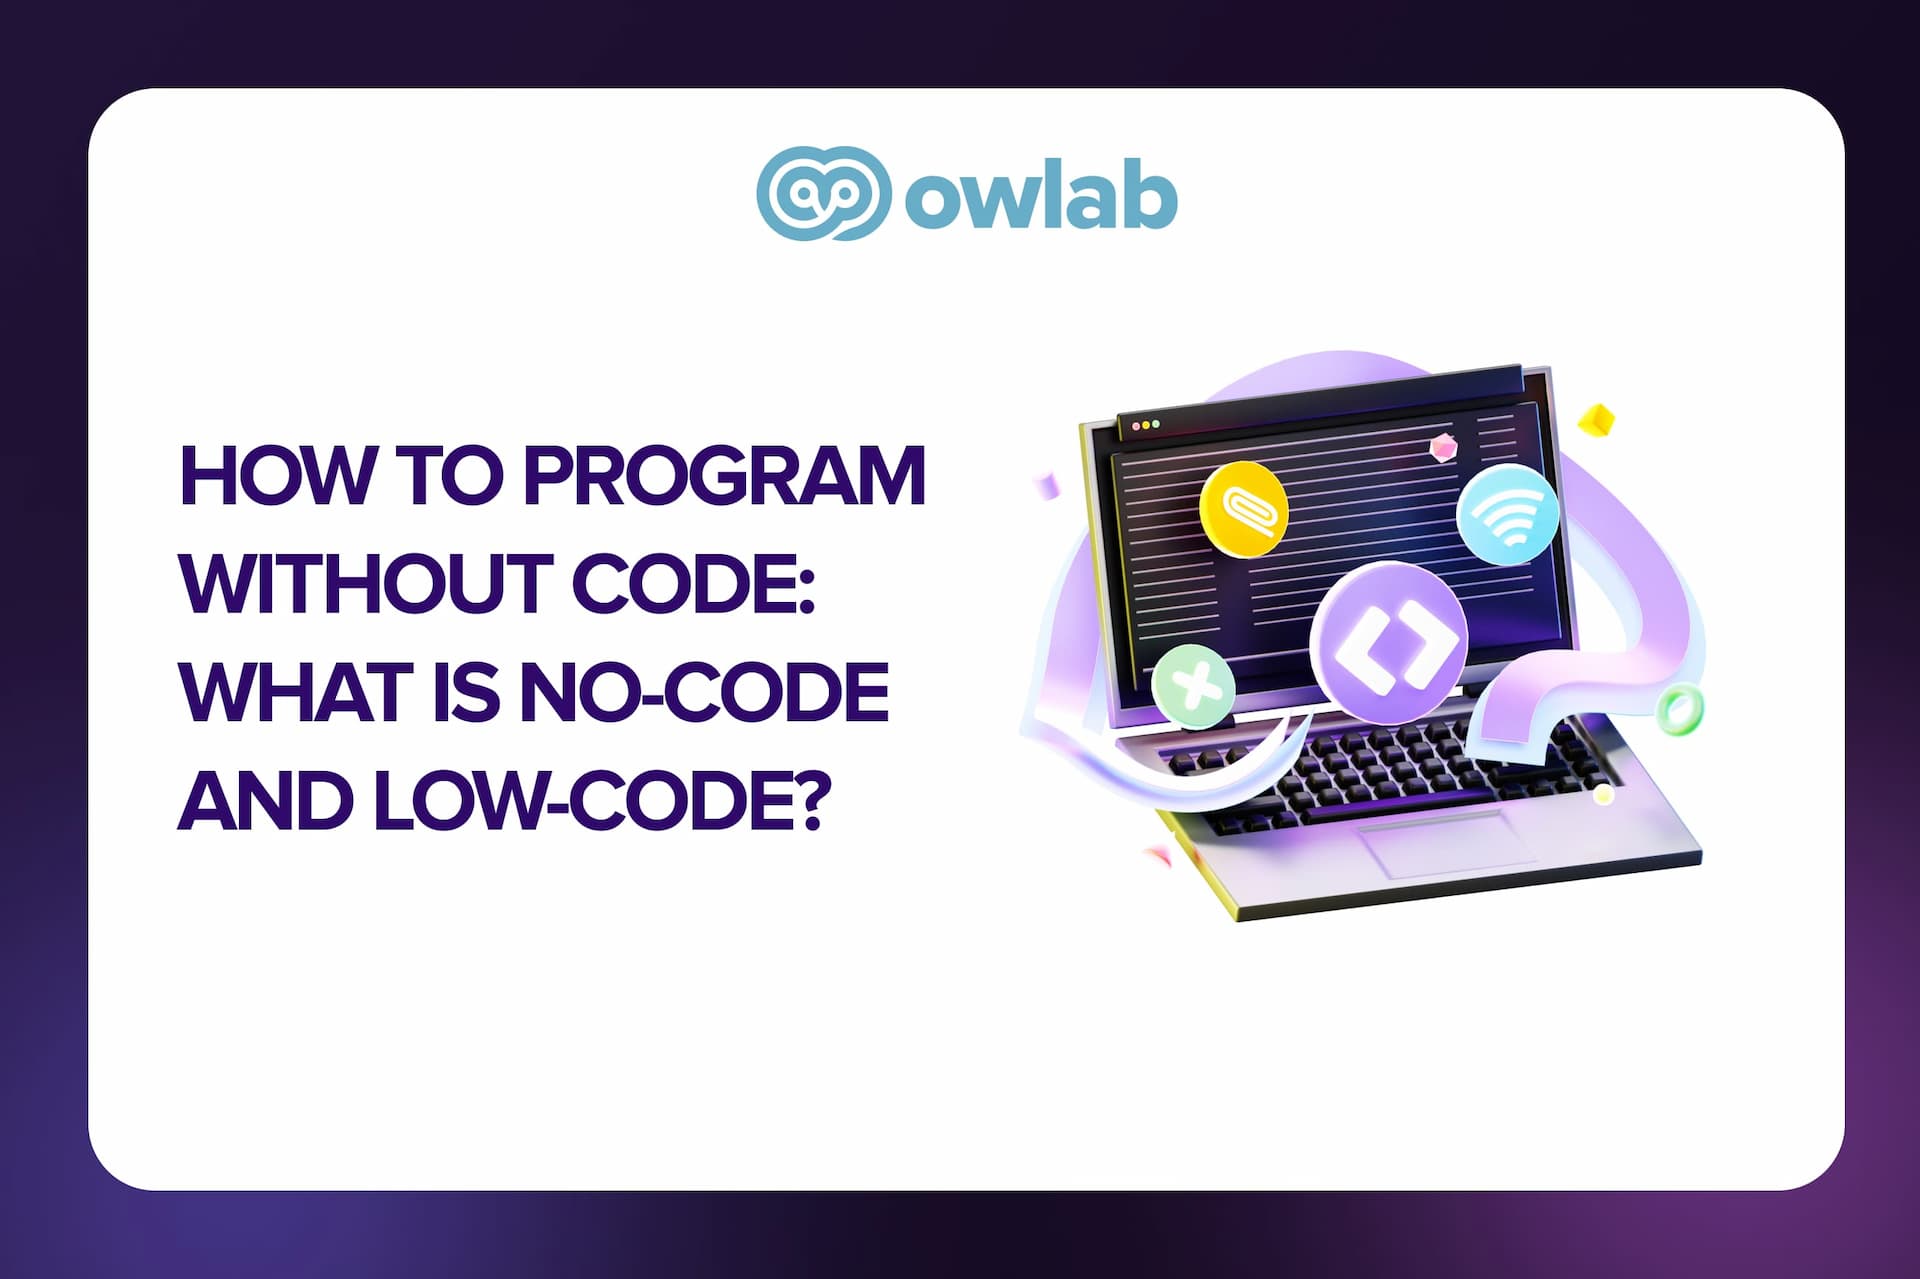 How to Program Without Code: What is No-Code and Low-Code?